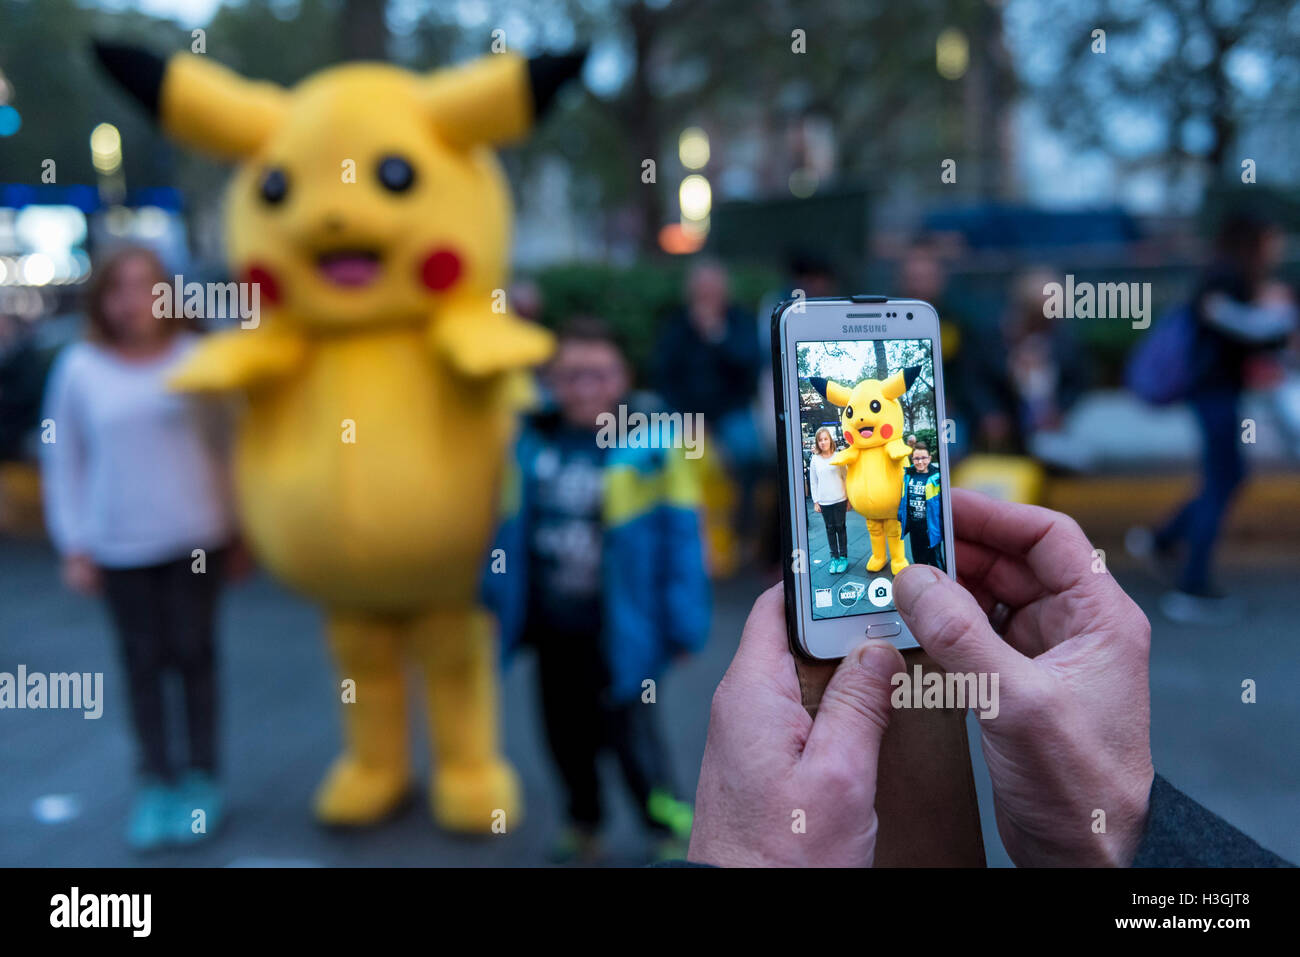 London Uk With People Still Gripped By The Worldwide Pokemon Go Craze Tourists Pose With A Street Performer Dressed As A Life Size Pikachu Character In Leicester Square Credit Stephen Chung Alamy